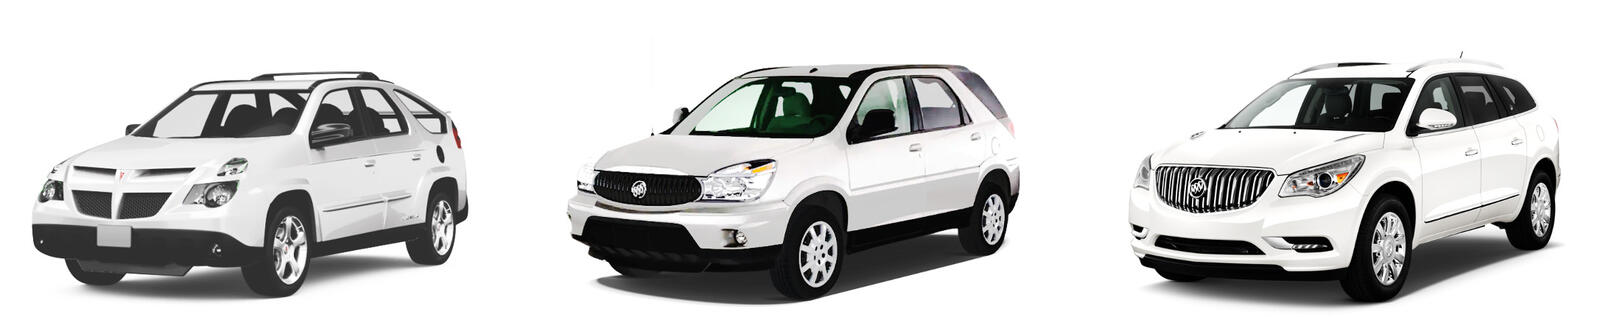 The  2005 Pontiac Aztek, the 2007 Buick Rendezvous, and the 2008 Buick Enclave